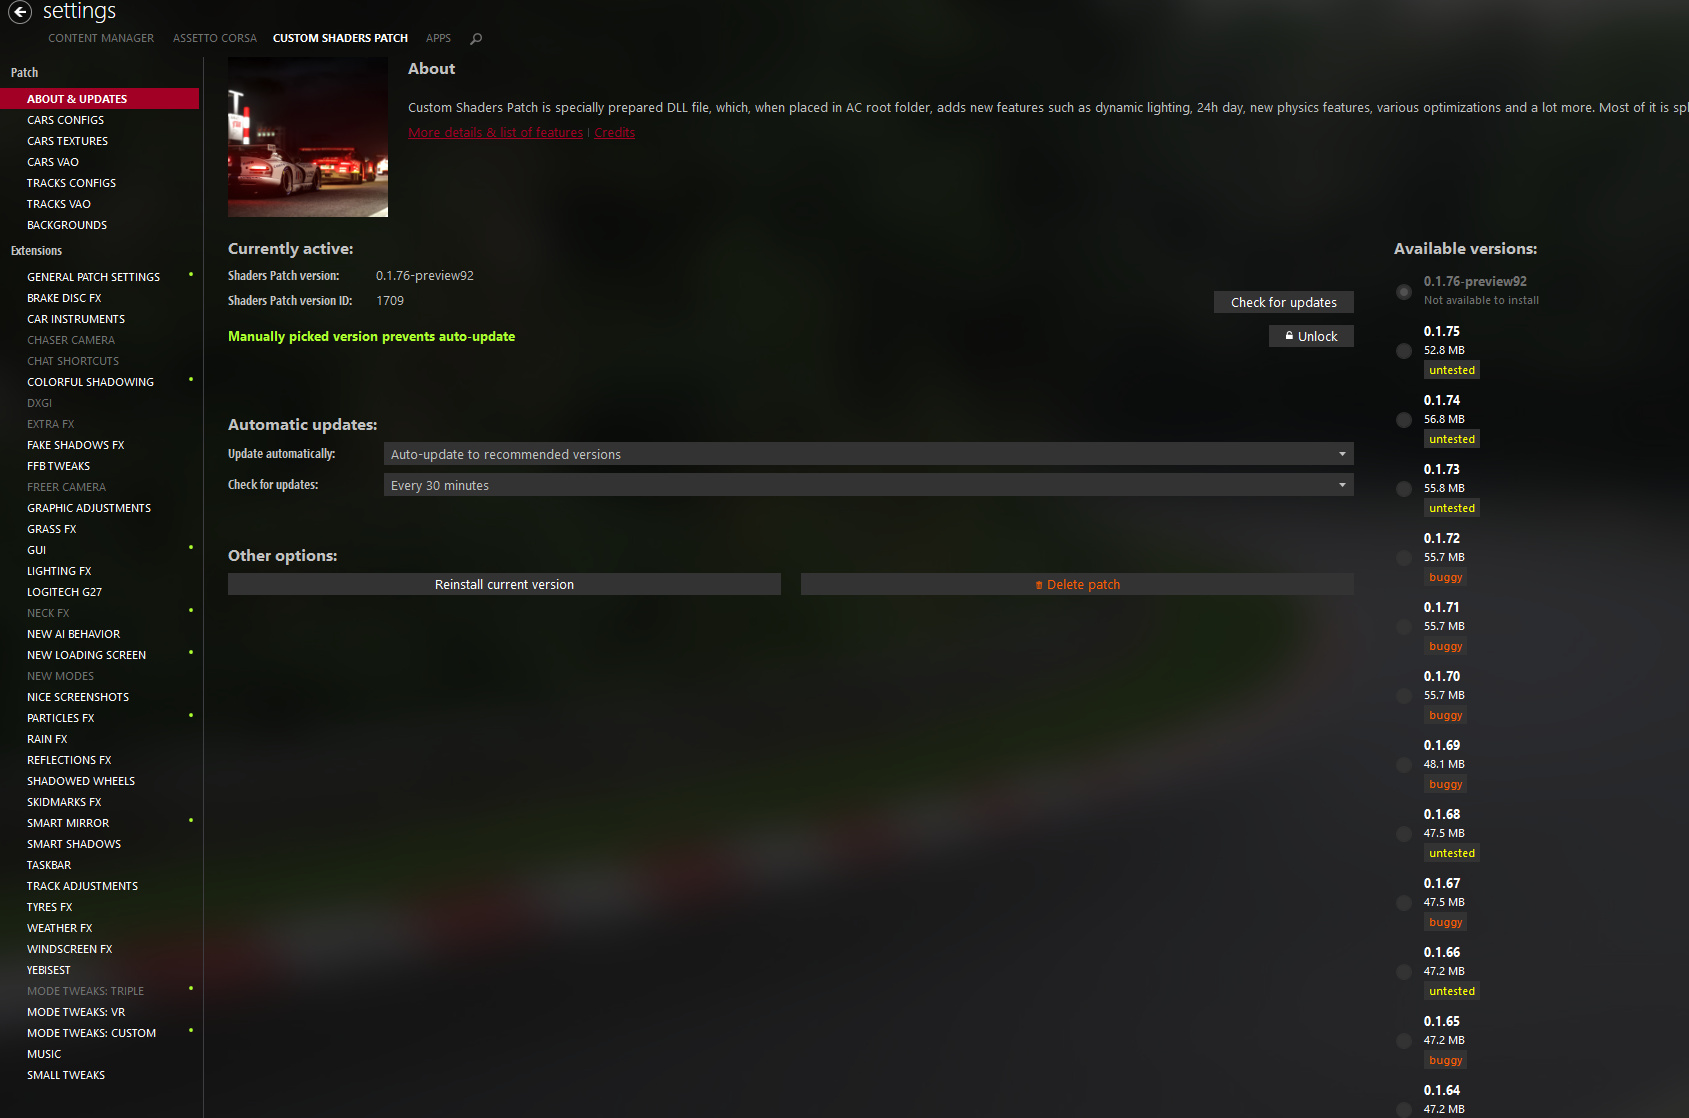 Enable SoftLock in Assetto Corsa with Content Manager 